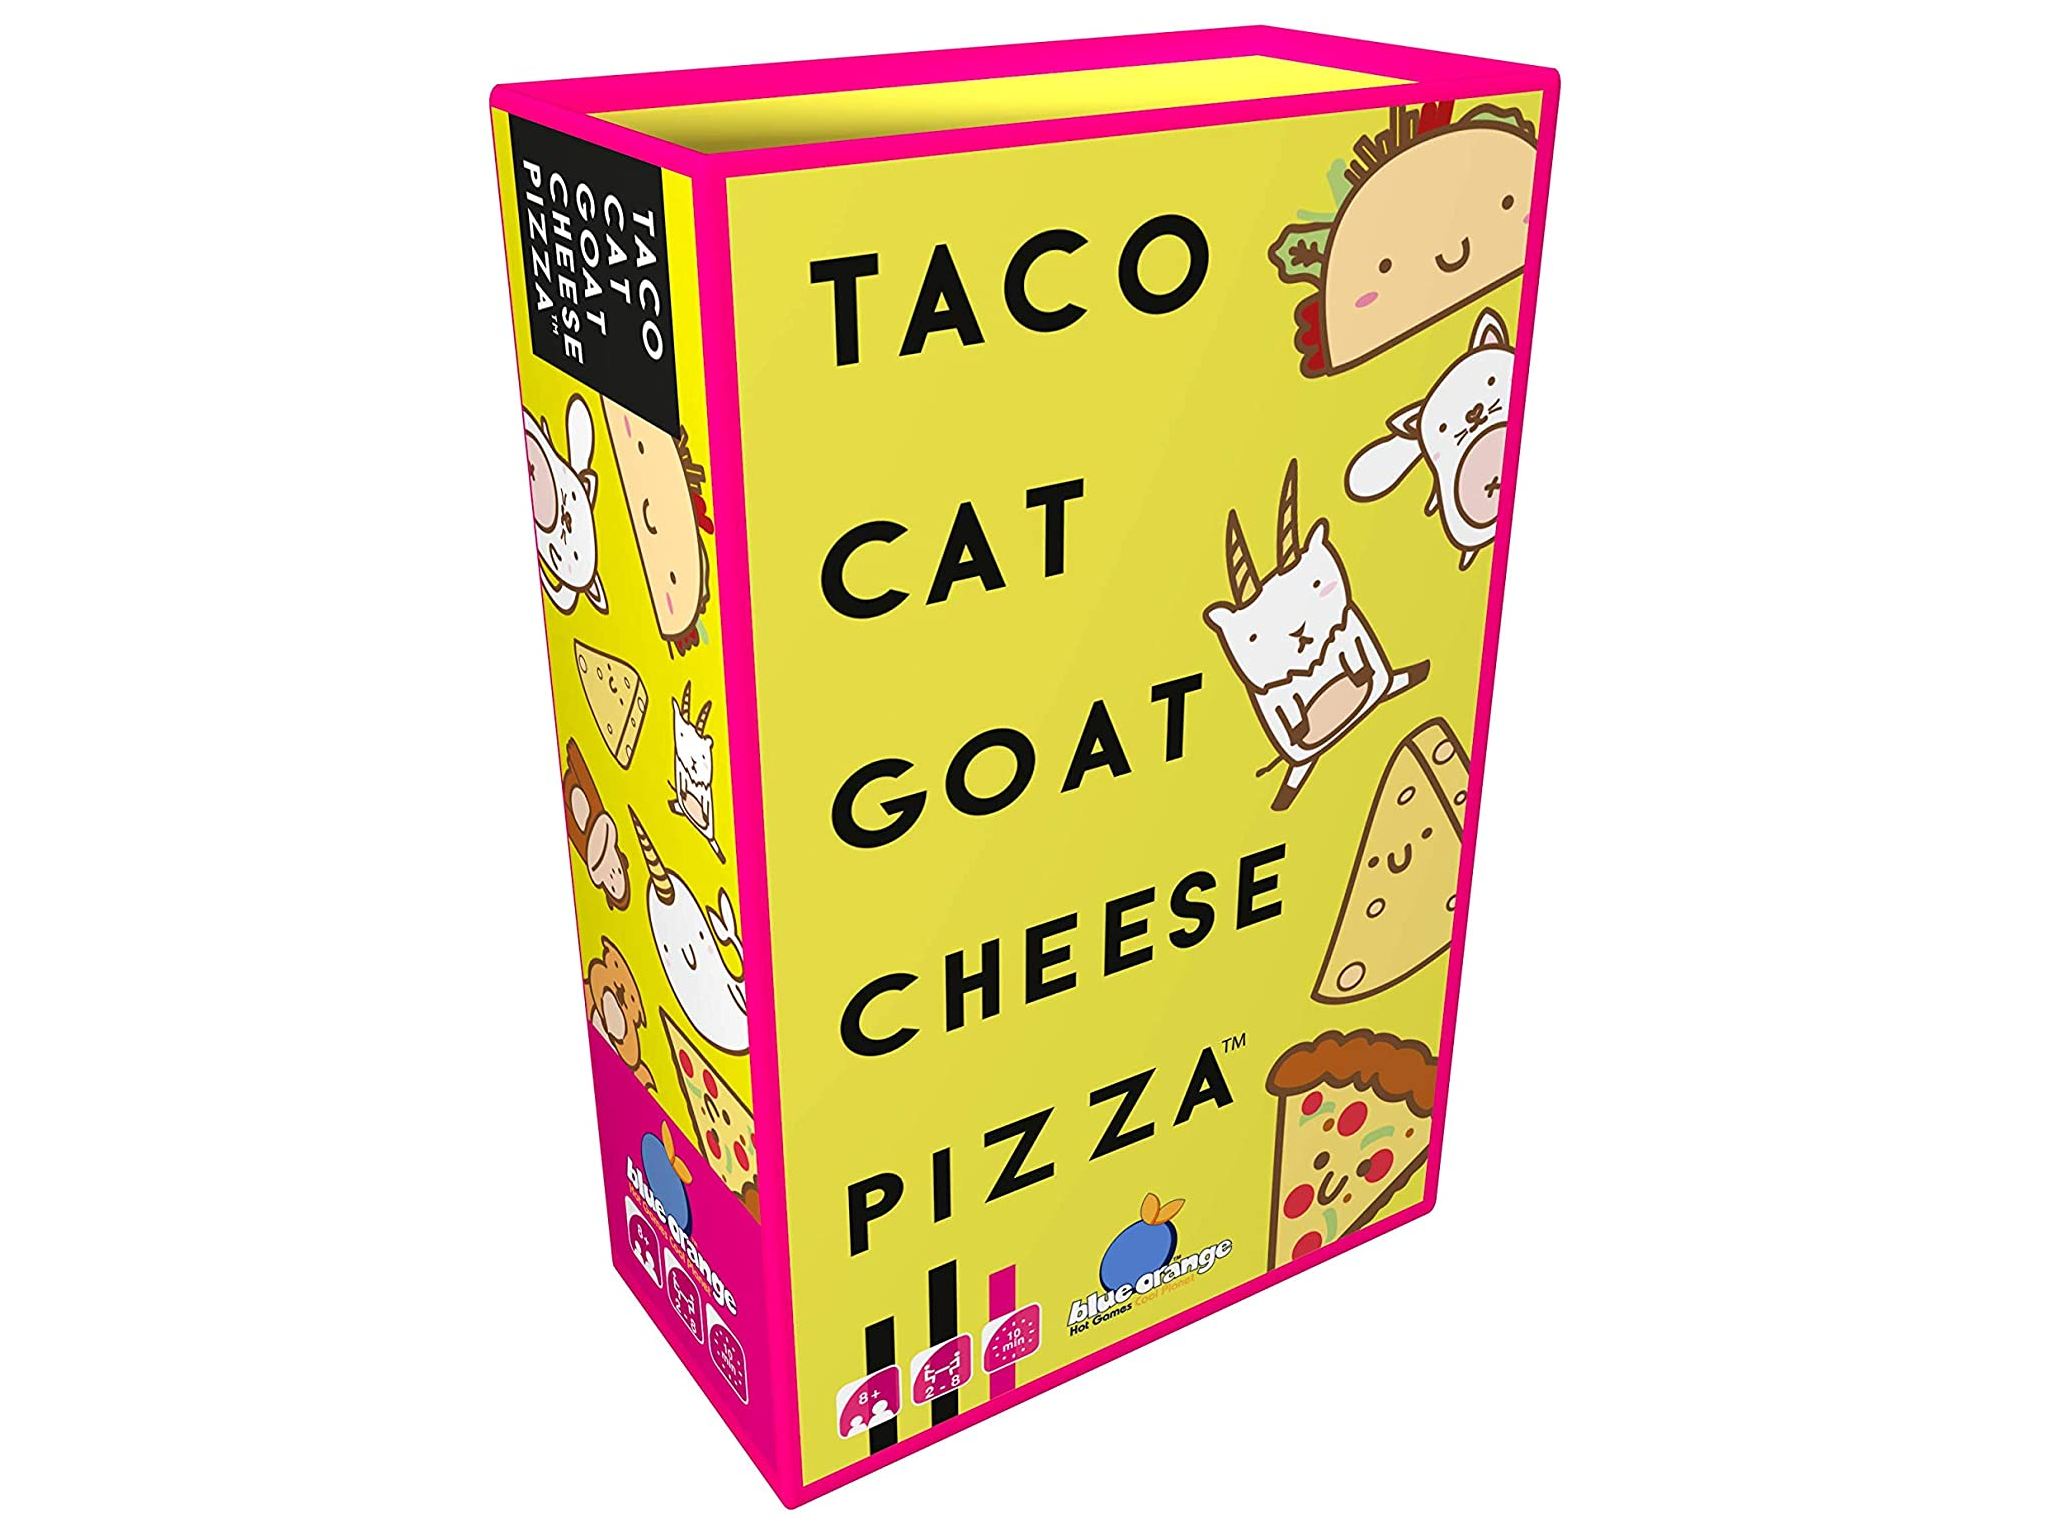 taco cat goat cheese pizza